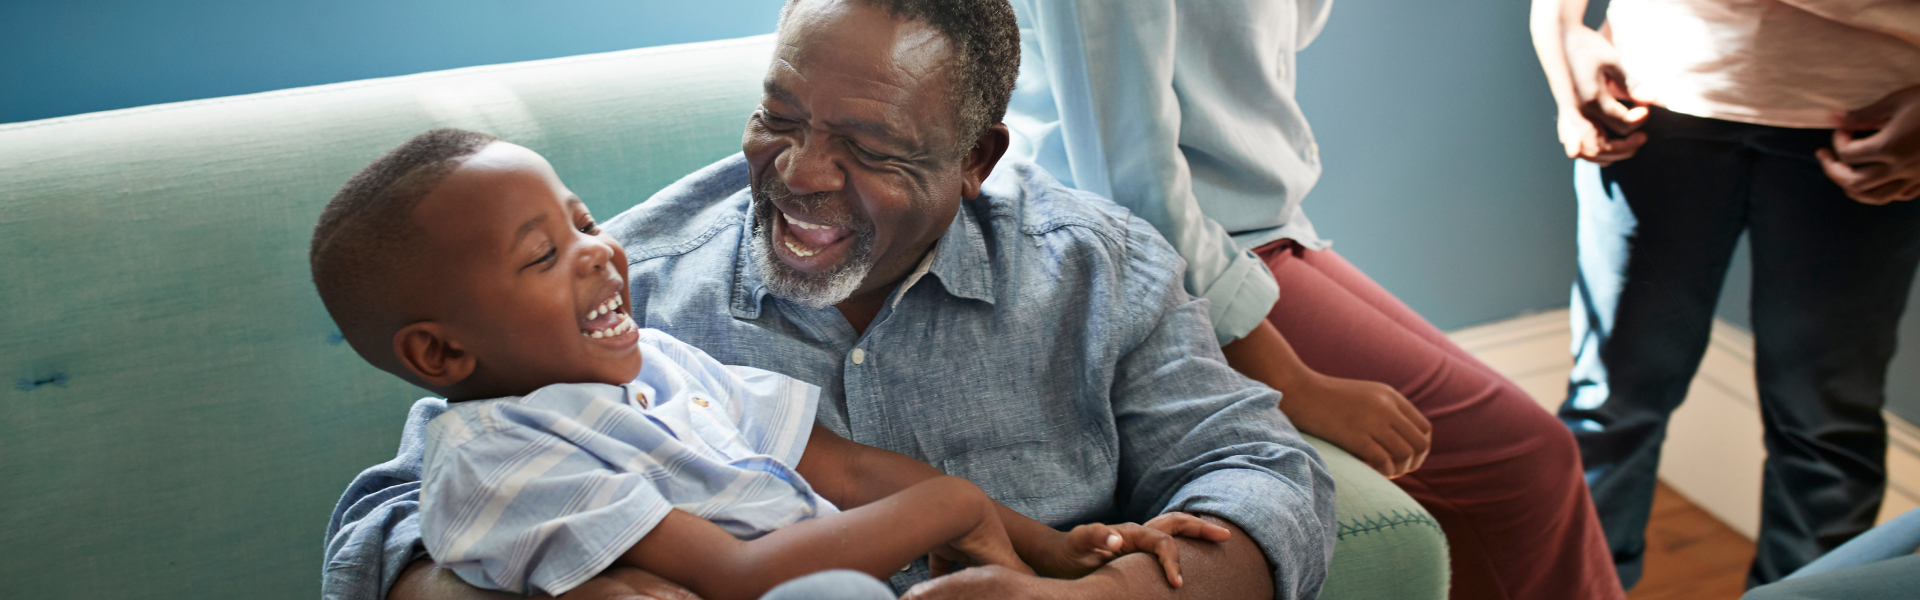 An older man is laughing while cradling a smiling boy in his arms.